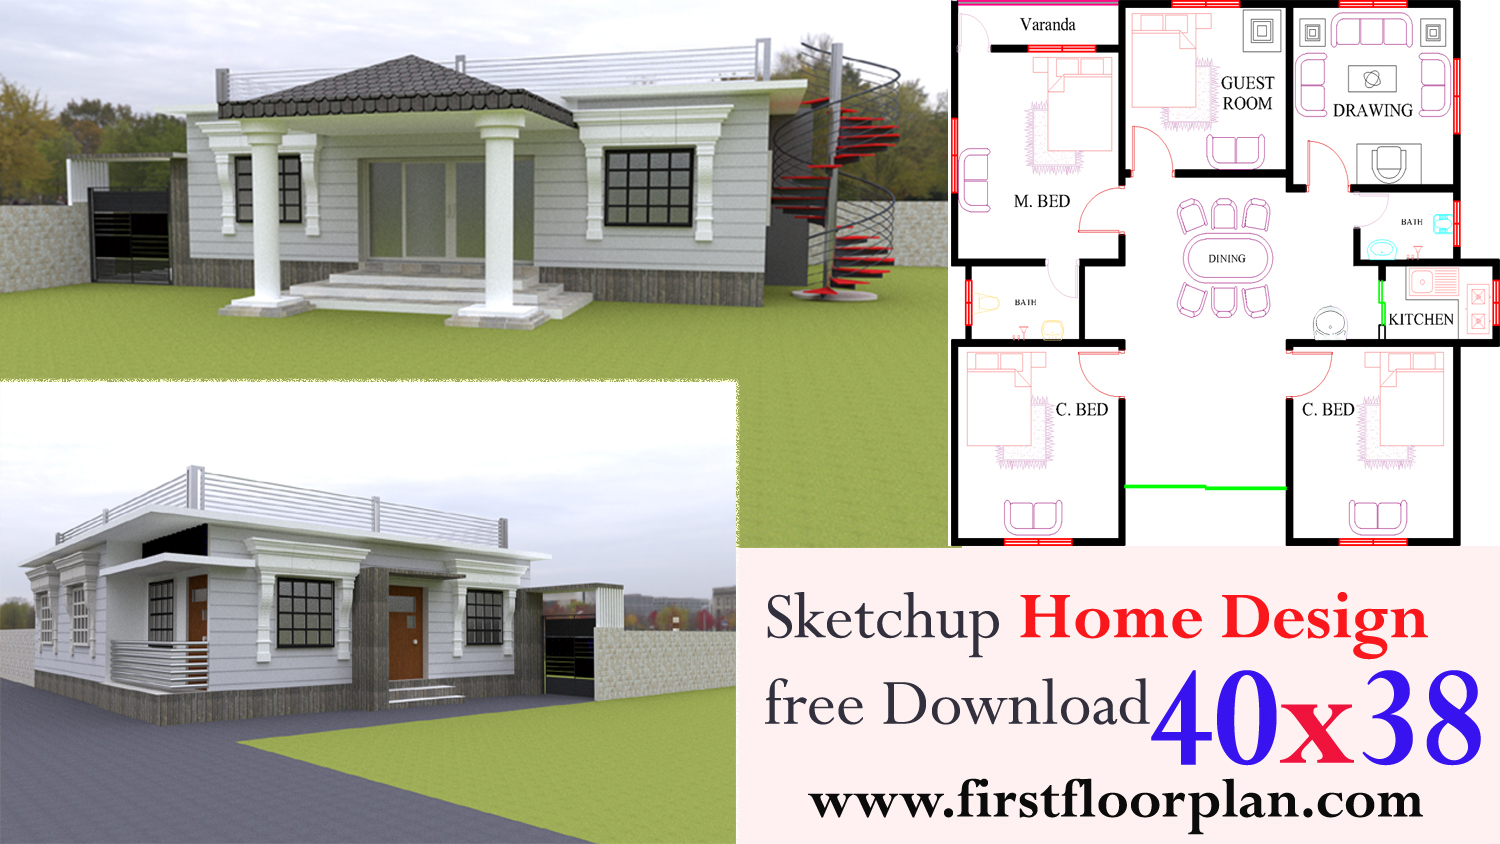 SketchUp elevation models free download, sketchup home design free download, house design with free autocad floor plan, 40x30 house plans and designs